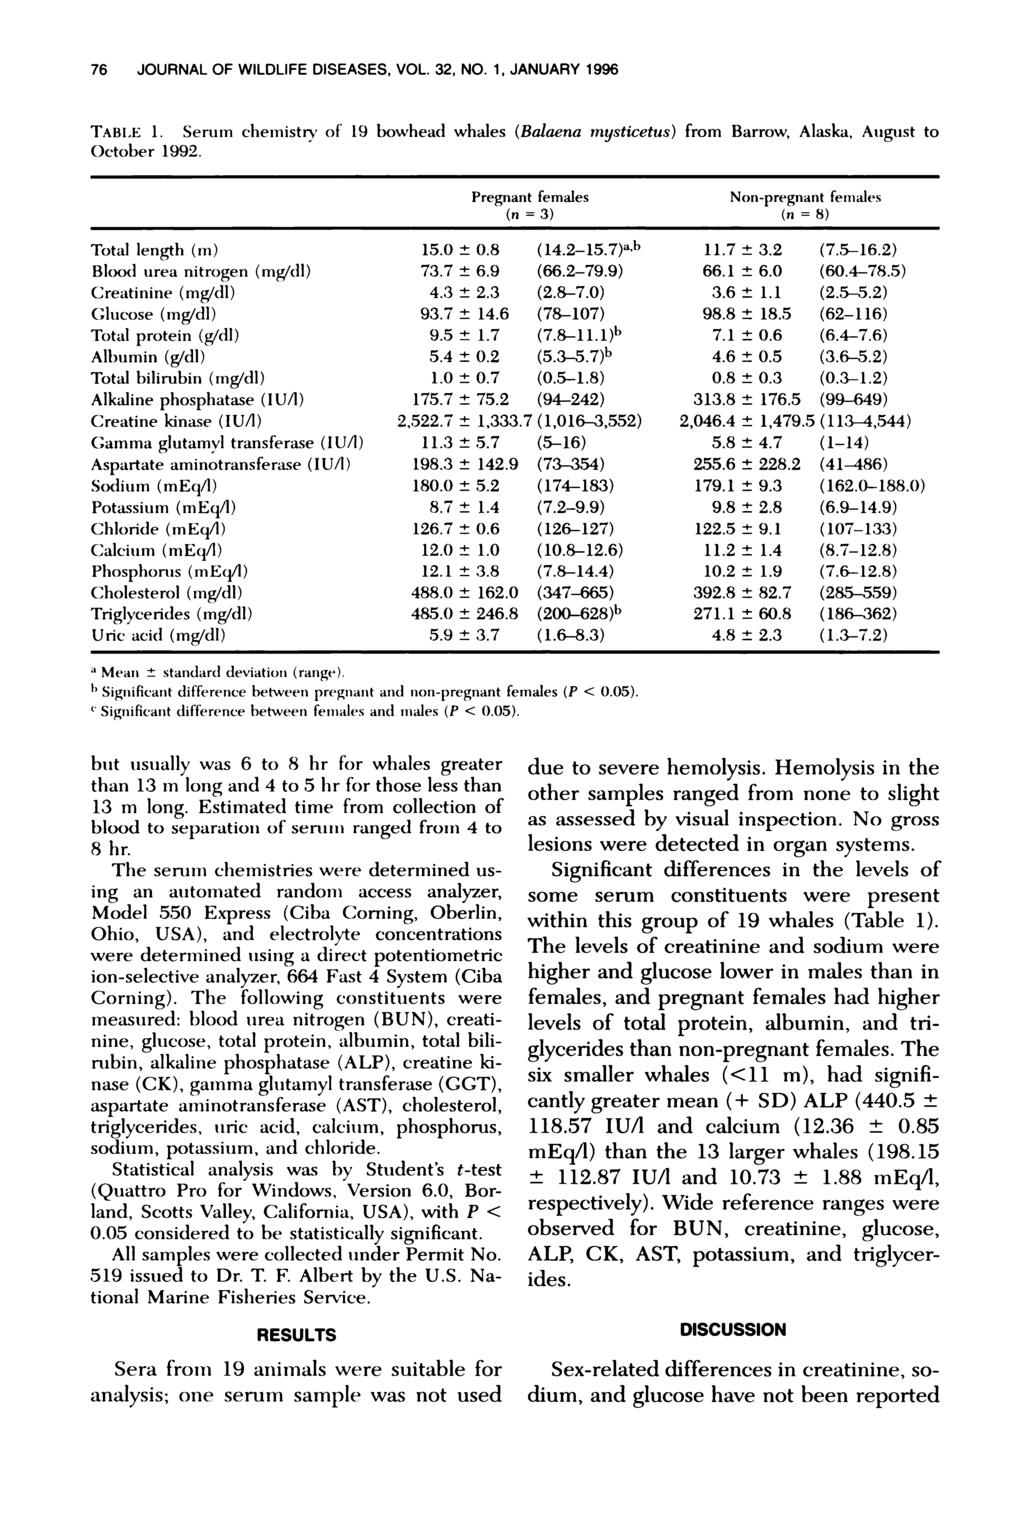 76 JOURNAL OF WILDLIFE DISEASES, VOL. 32, NO. 1, JANUARY 1996 TABLE 1. Serumn chemistry of 19 bowhead whales (Balaena inysticetus) from Barrow, Alaska, August to October 1992.